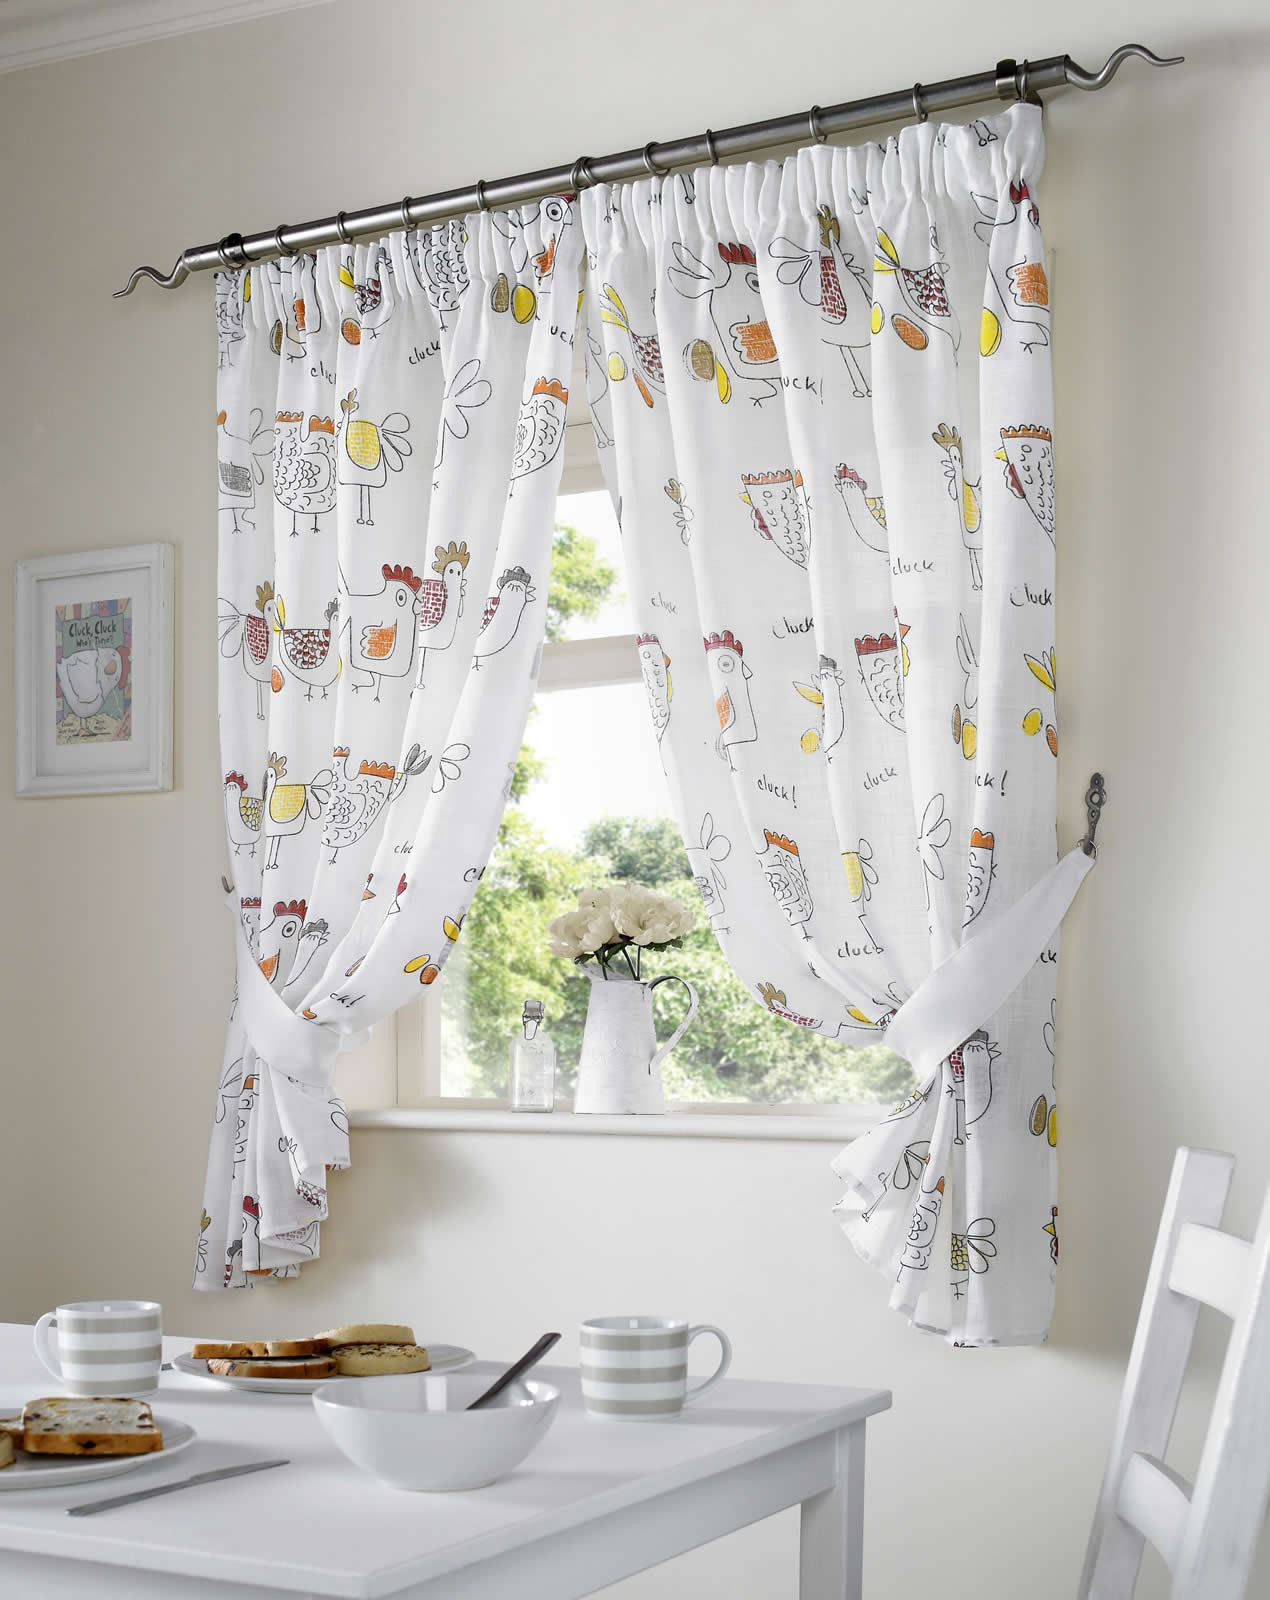 Kitchen Curtains And Valances
 CHICKENS ROOSTER COUNTRY STYLE KITCHEN CURTAIN SET WINDOW